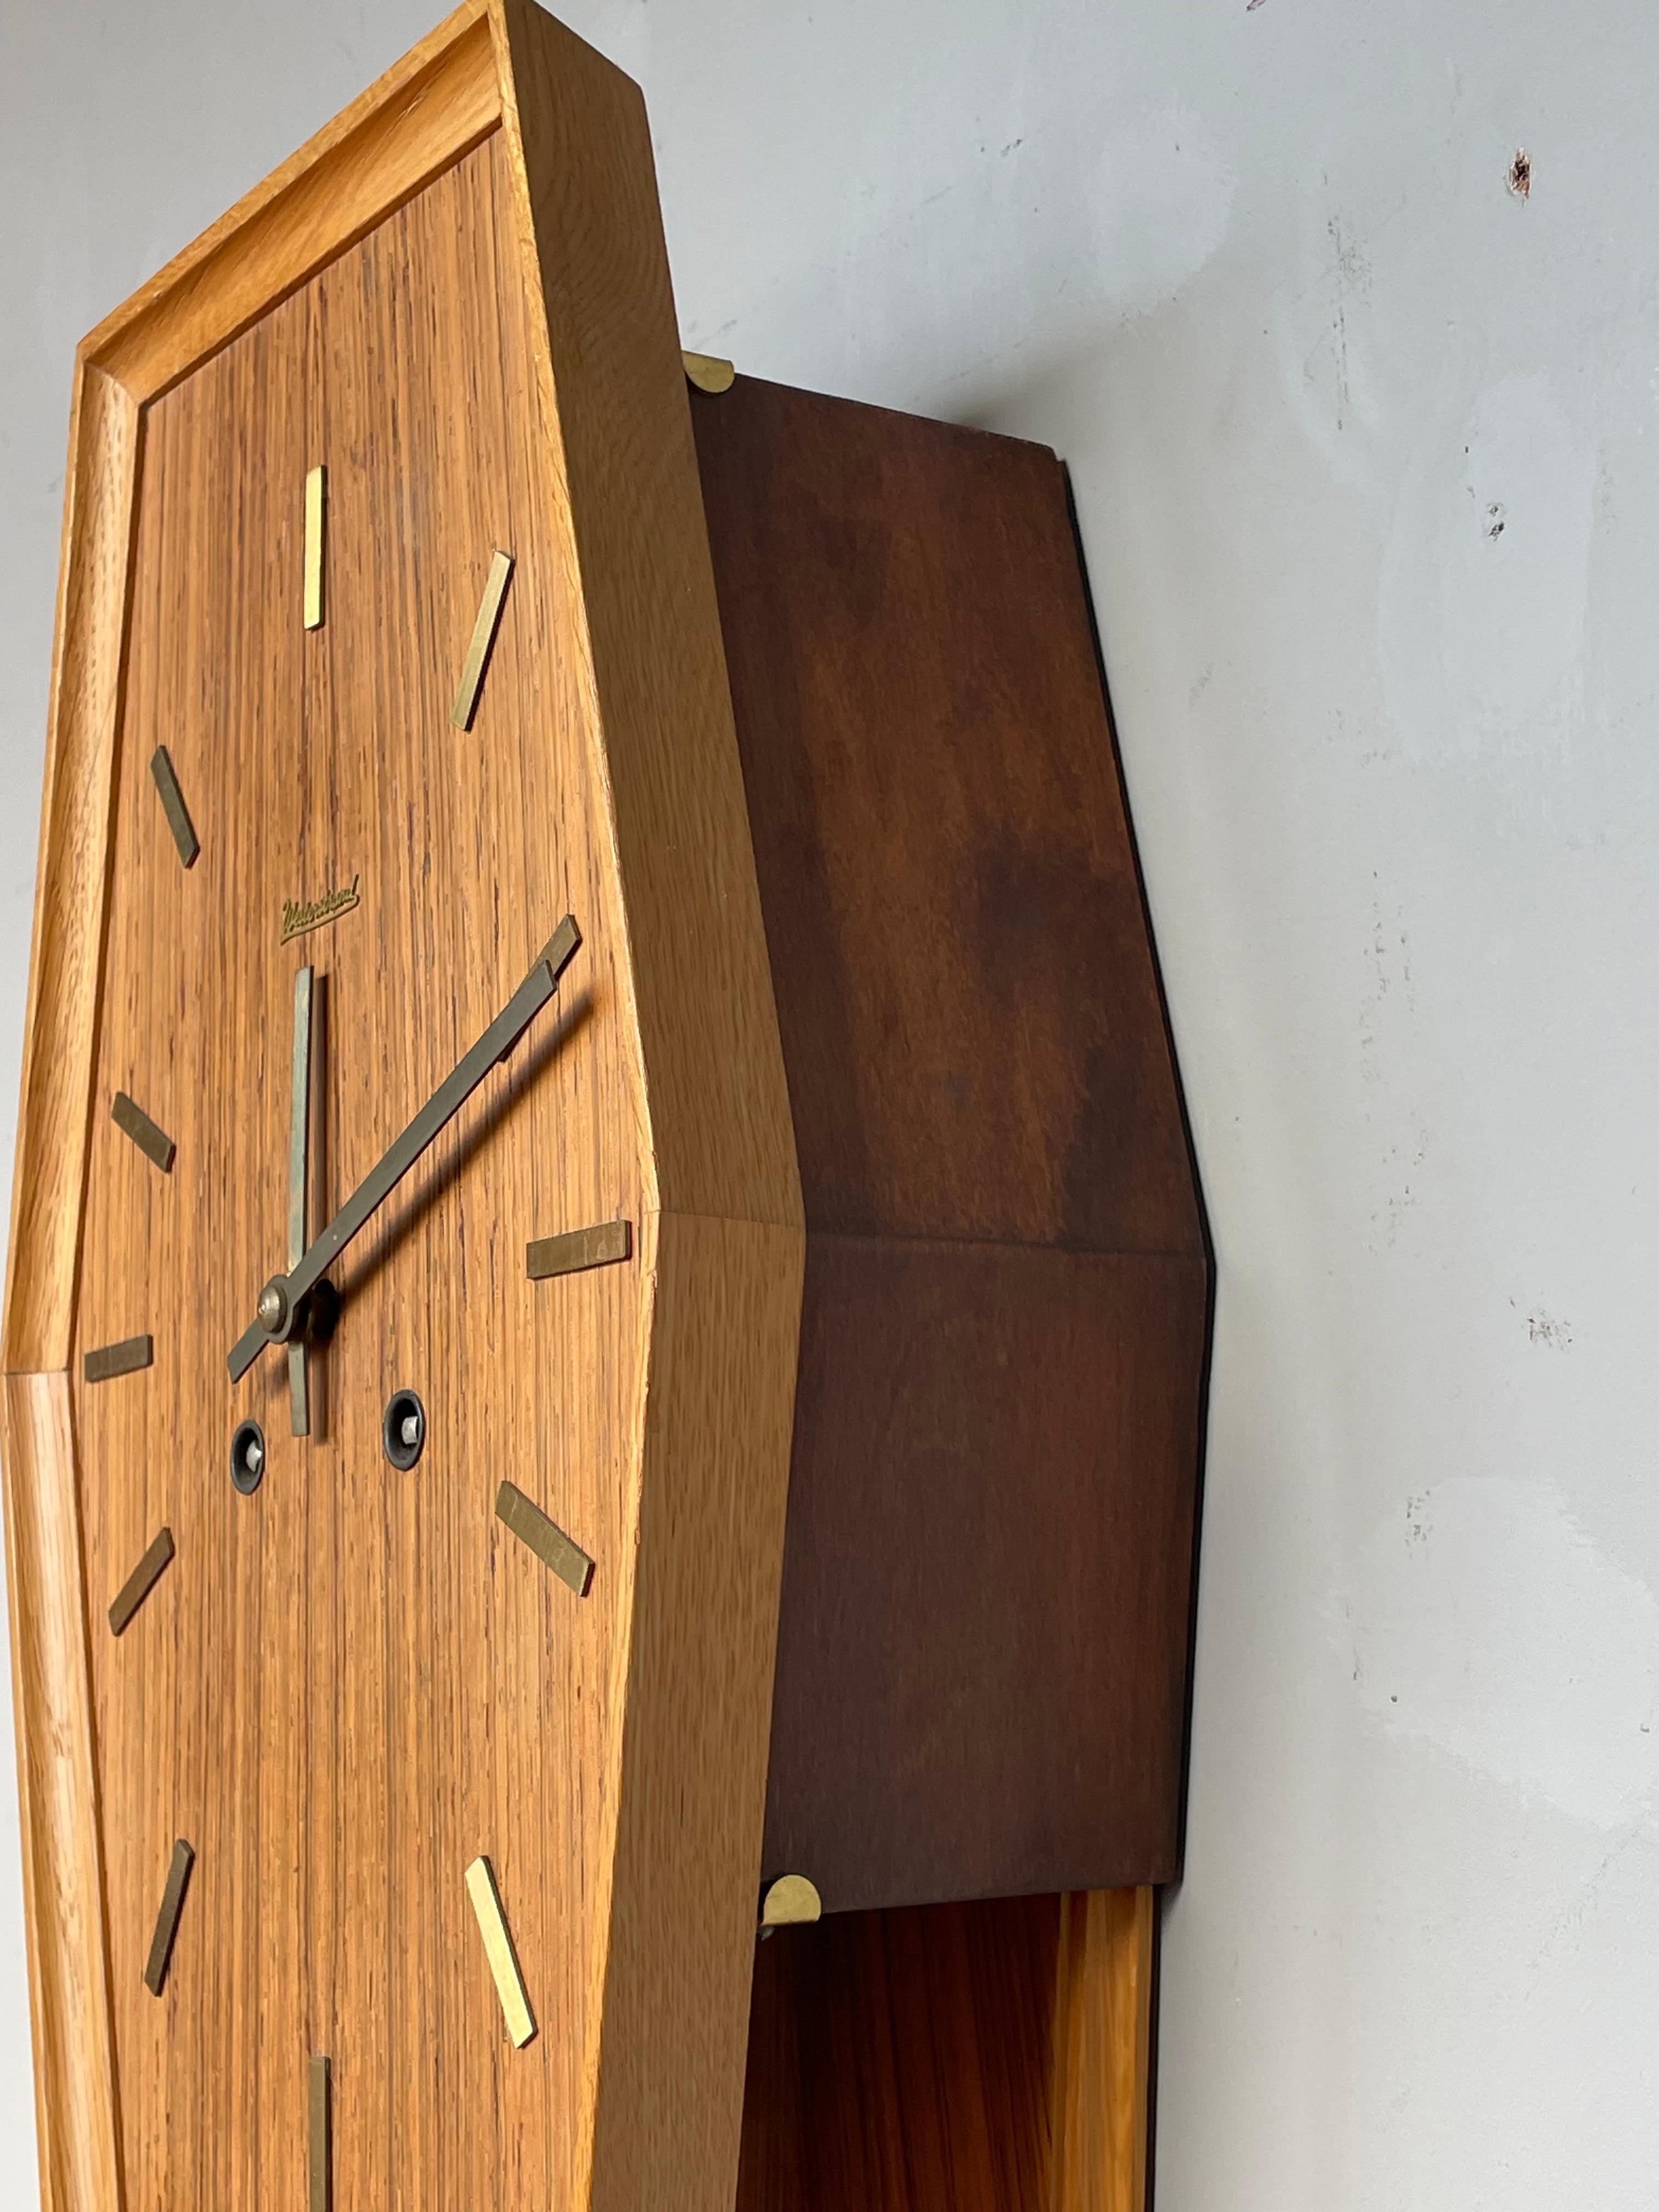 20th Century Beautiful Midcentury Modern Wooden Pendulum Wall Clock By Westerstrand, Sweden For Sale